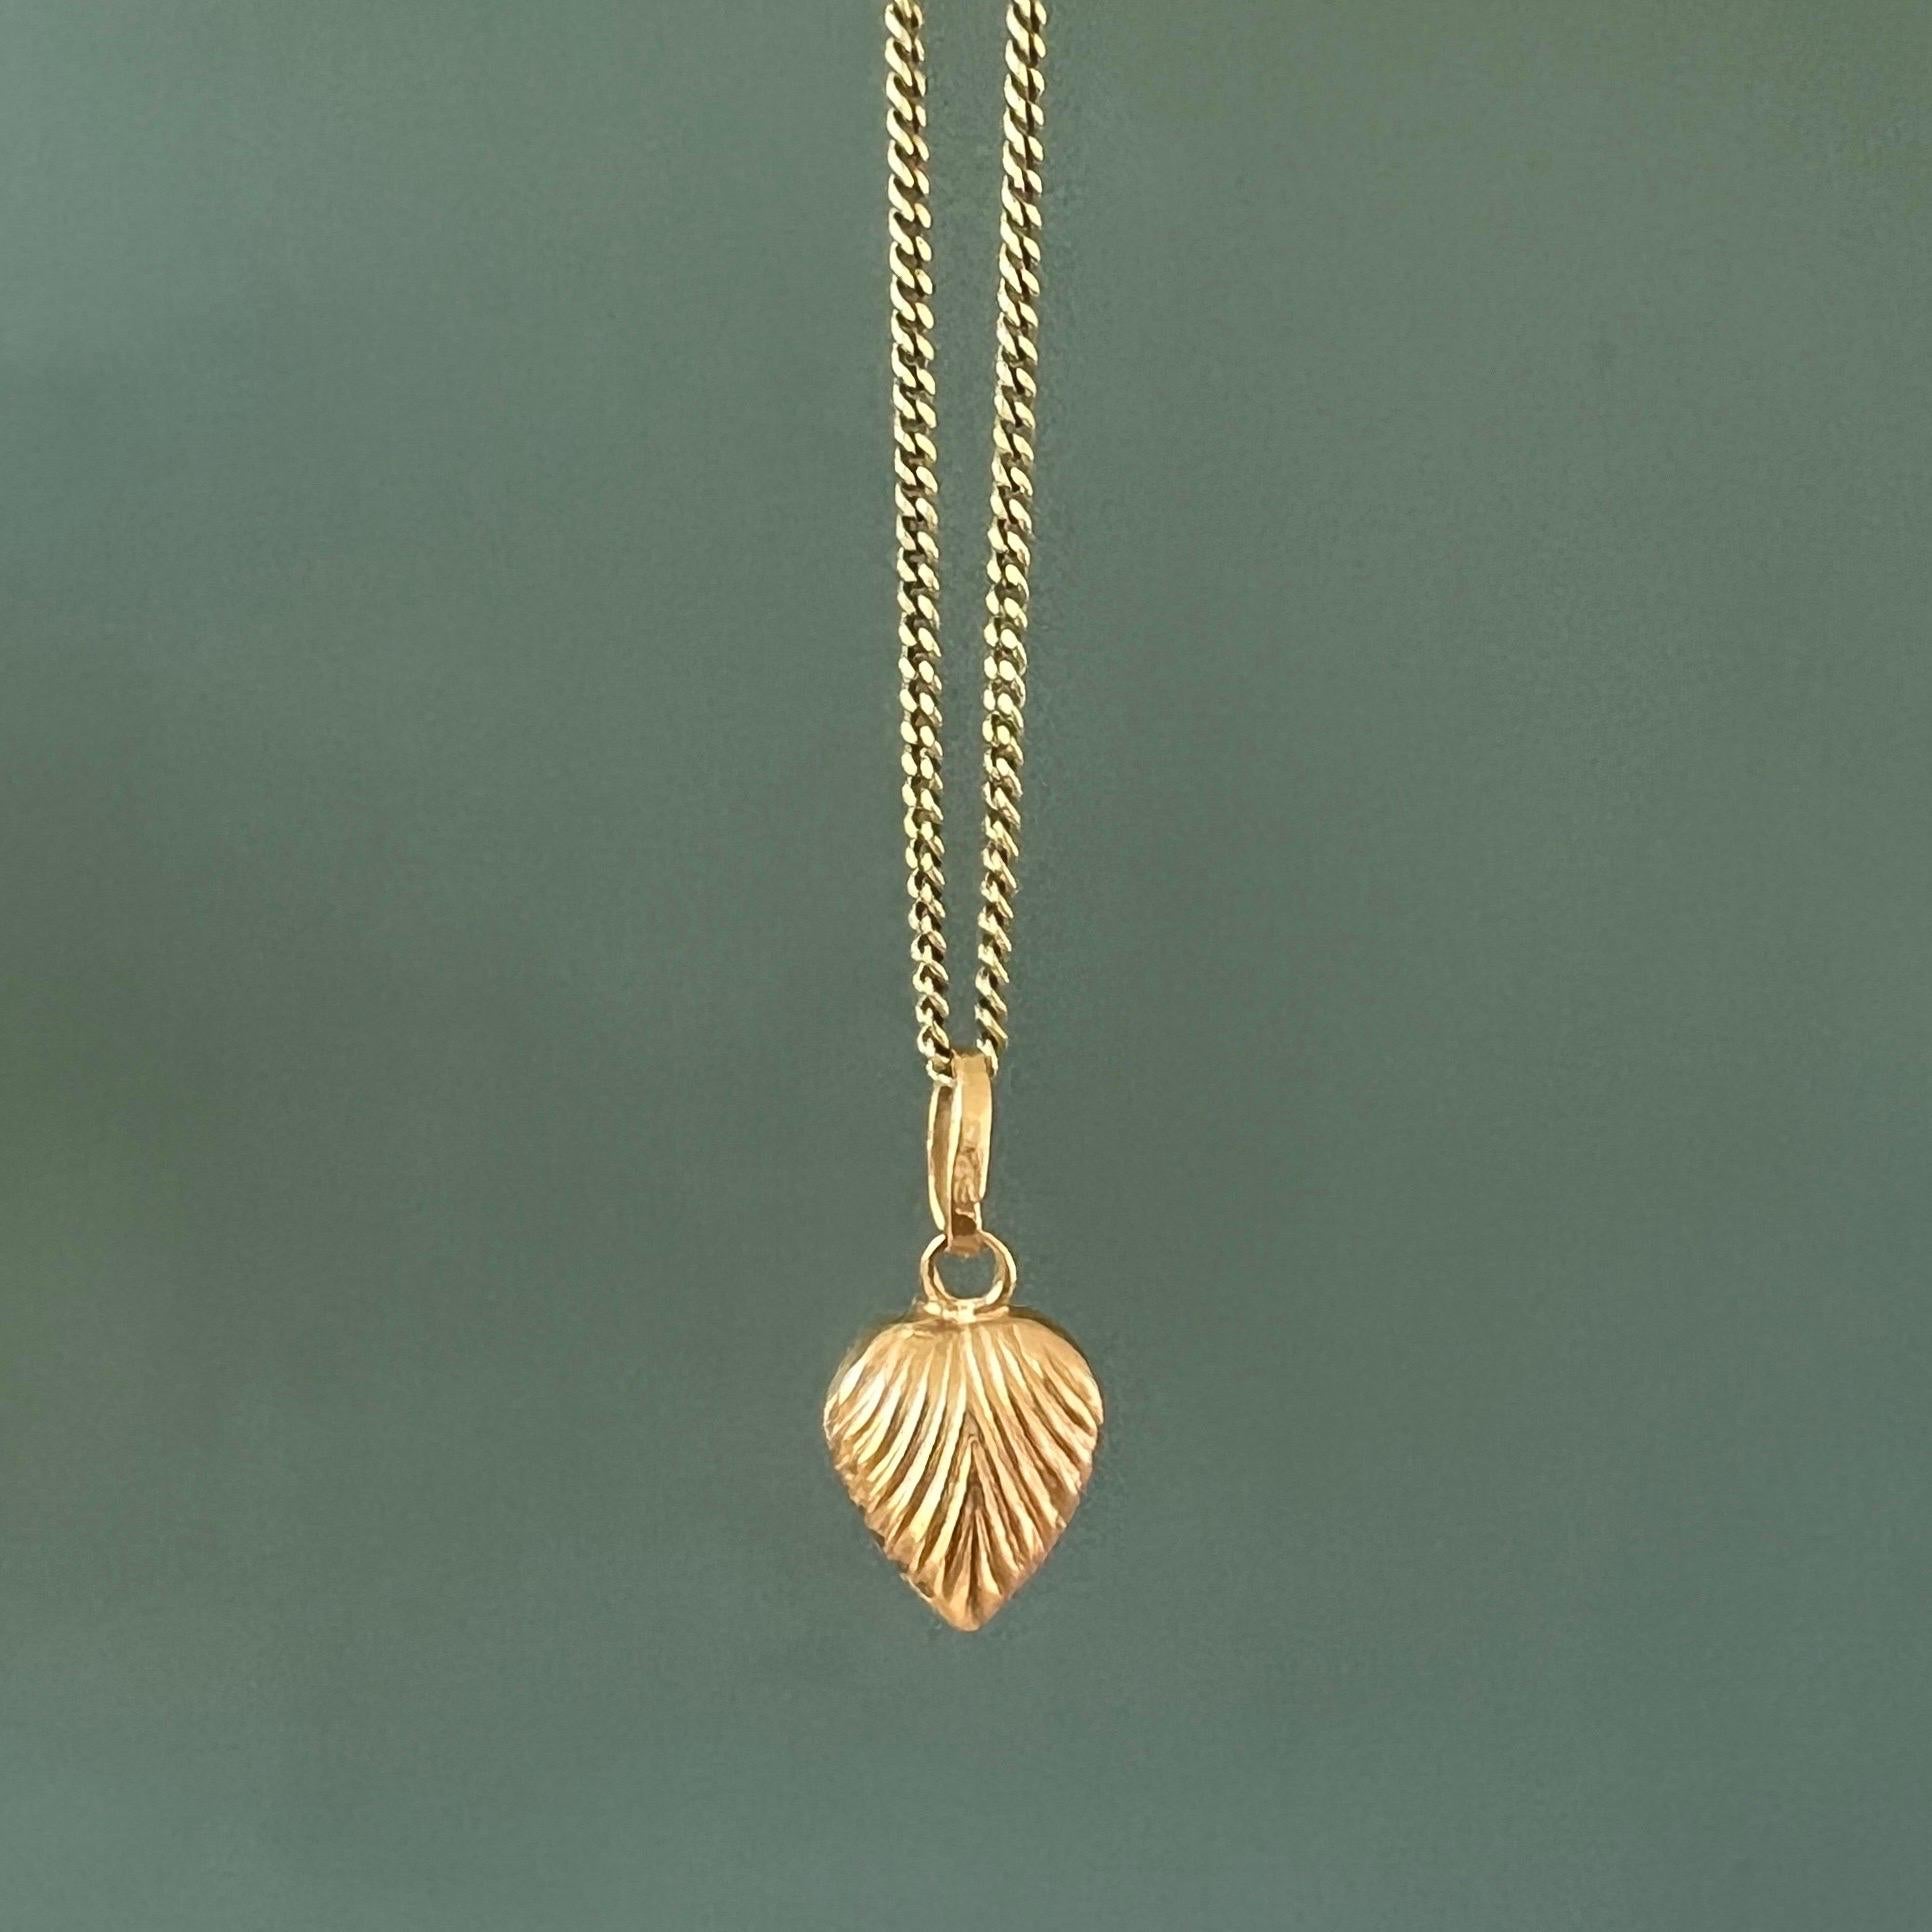 A vintage gold engraved sunburst heart charm pendant. The sunburst heart charm is beautifully designed and made in 18 karat gold. Charms are great to collect as wearable memories, it has a symbolic and often a sentimental value. They can be added to